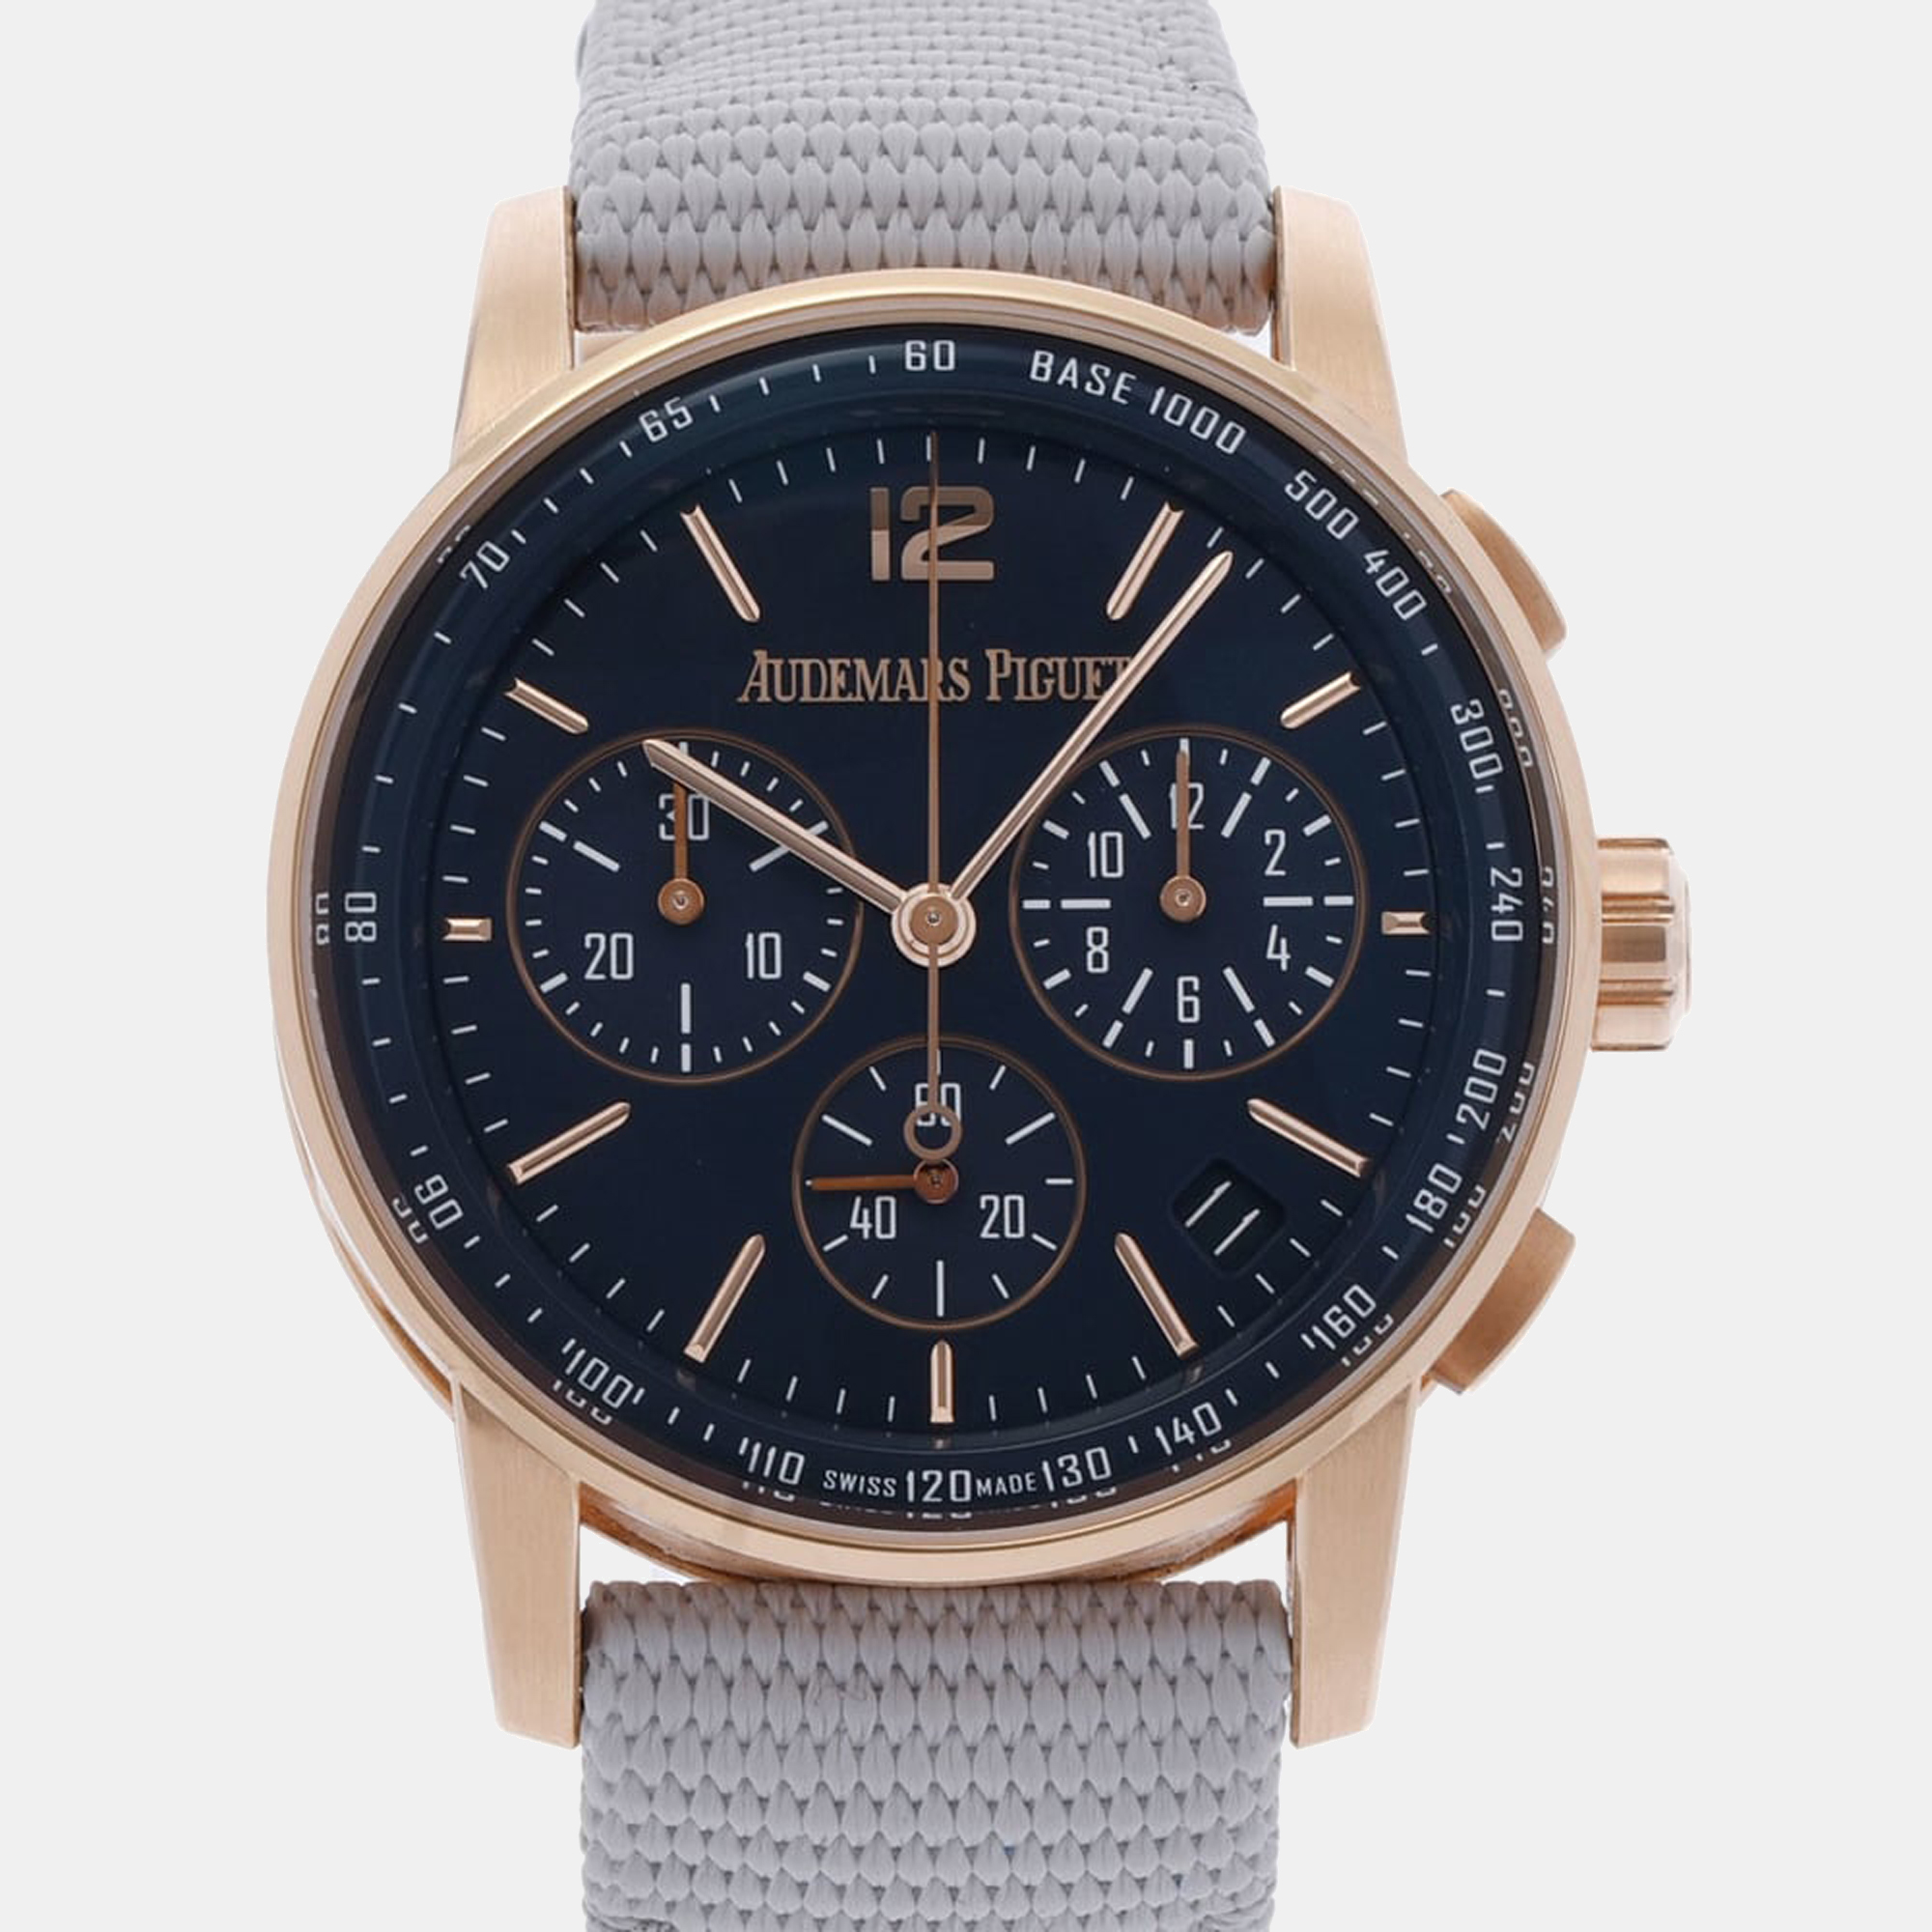 This authentic AP watch is characterized by skillful craftsmanship and understated charm. Meticulously constructed to tell time in an elegant way it comes in a sturdy case and flaunts a seamless blend of innovative design and flawless style.